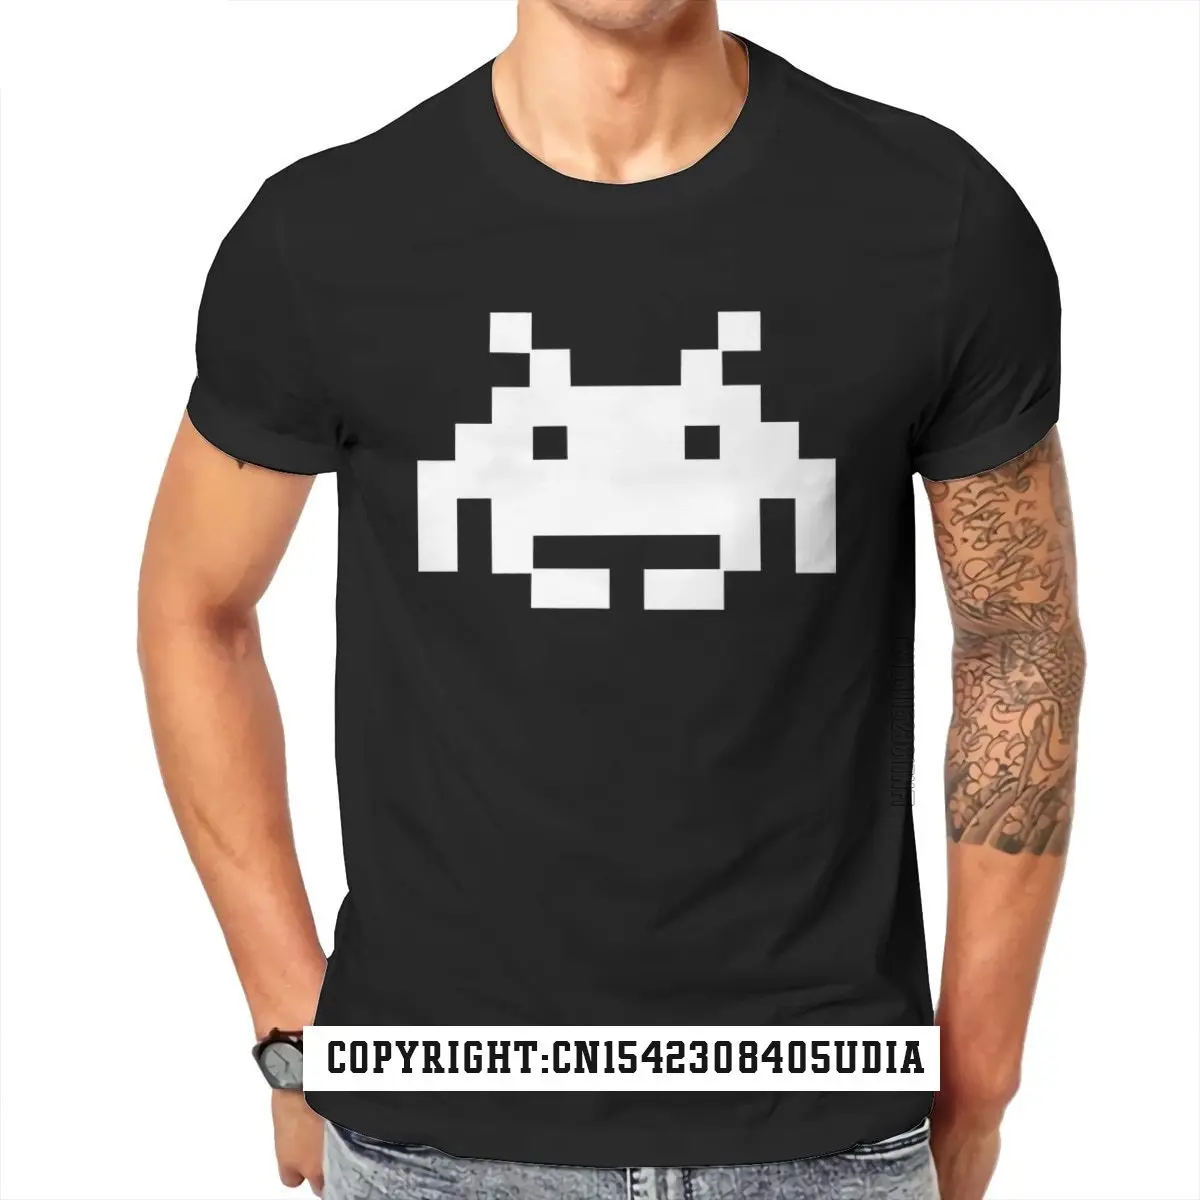 Don't Invade My Space Newest Tshirts Space Invaders Arcade Streetwear T Shirt Classic Mens Tops & Tees Street Top T-Shirts